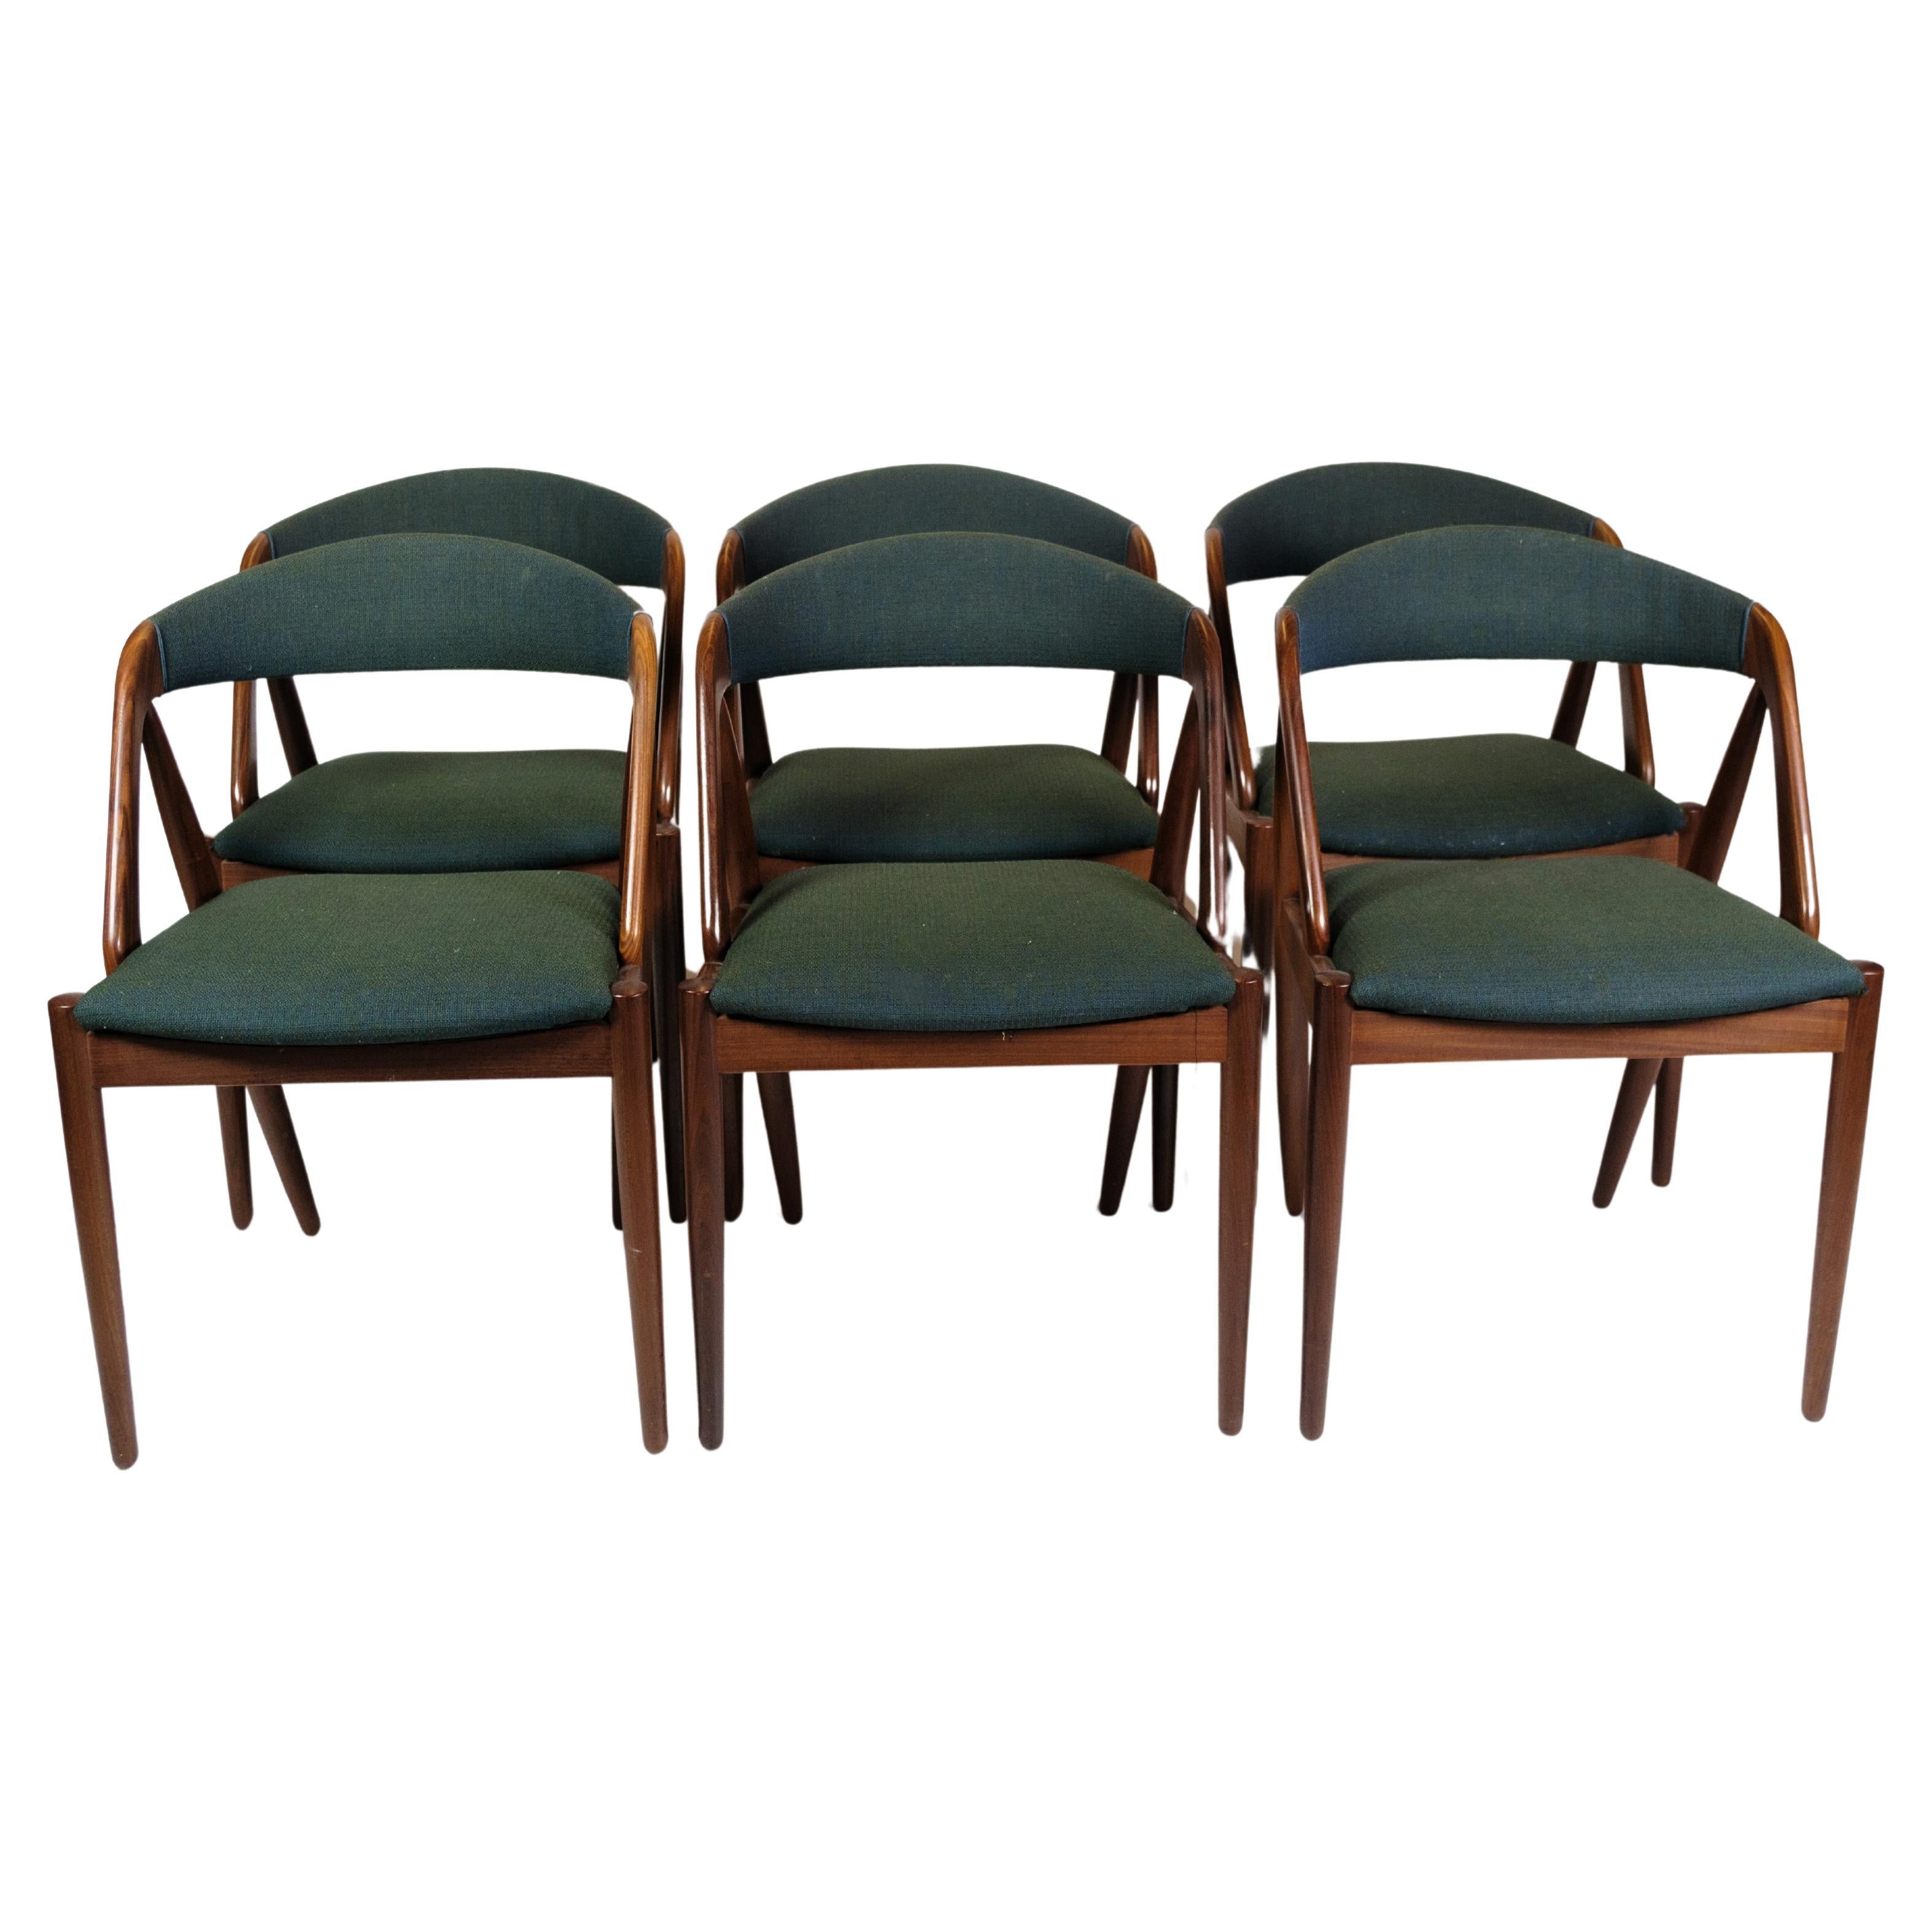 Set Of 6 Dining Room Chairs Model 31 Made In Teak By Kai Kristiansen From 1950 For Sale